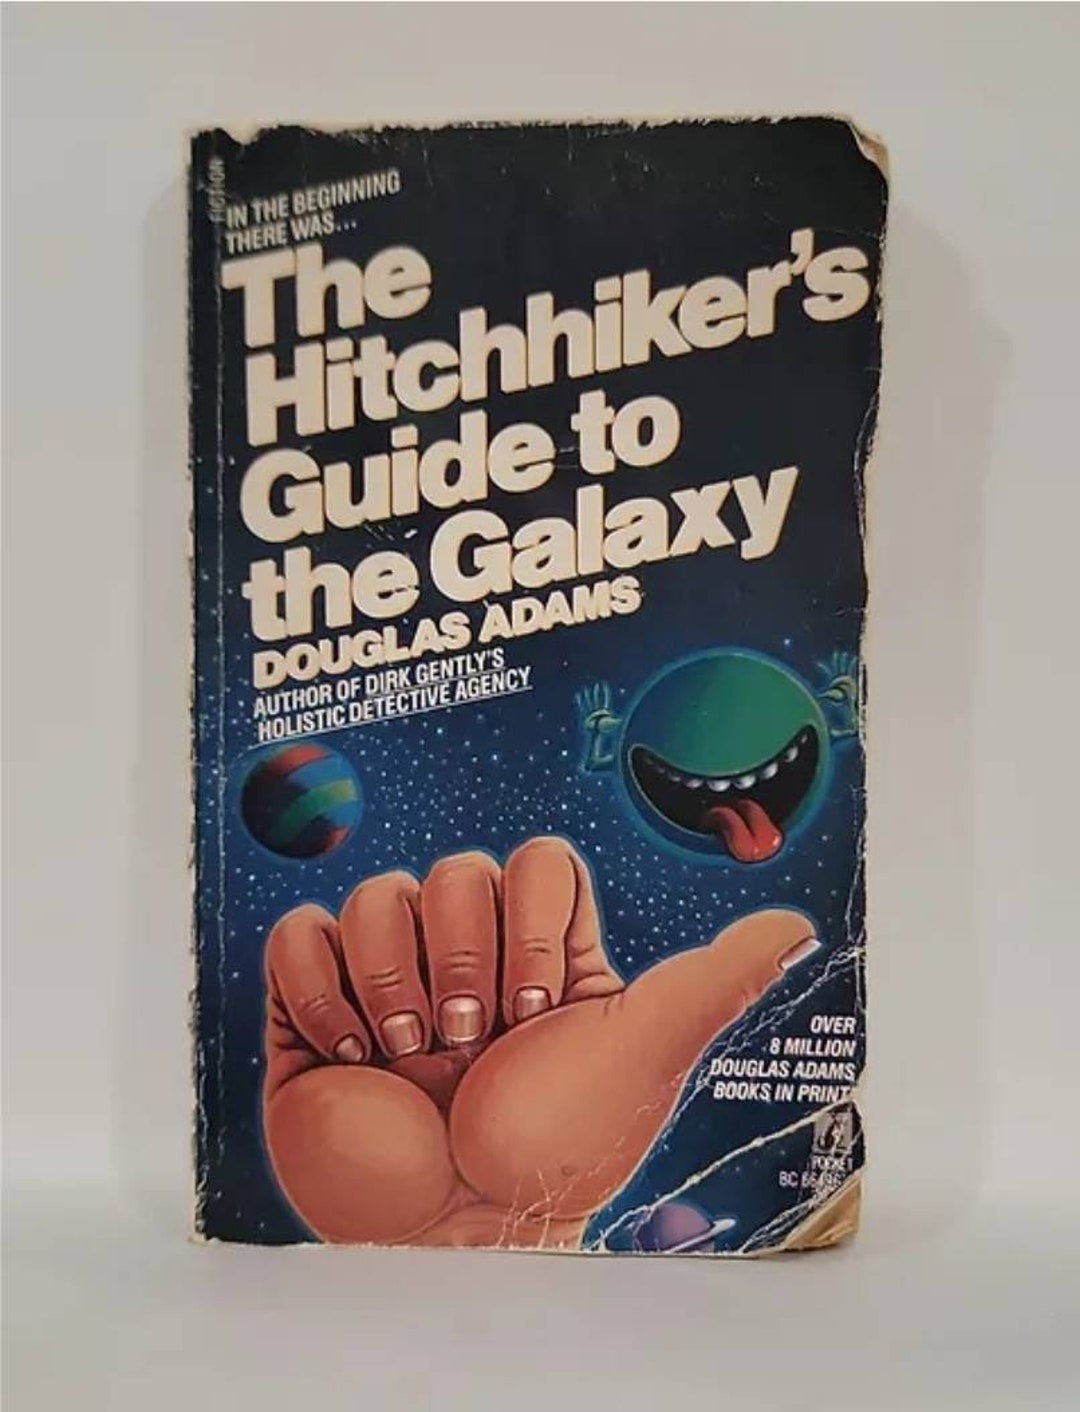 Don't Panic: The Official Hitchhikers Guide by Neil Gaiman